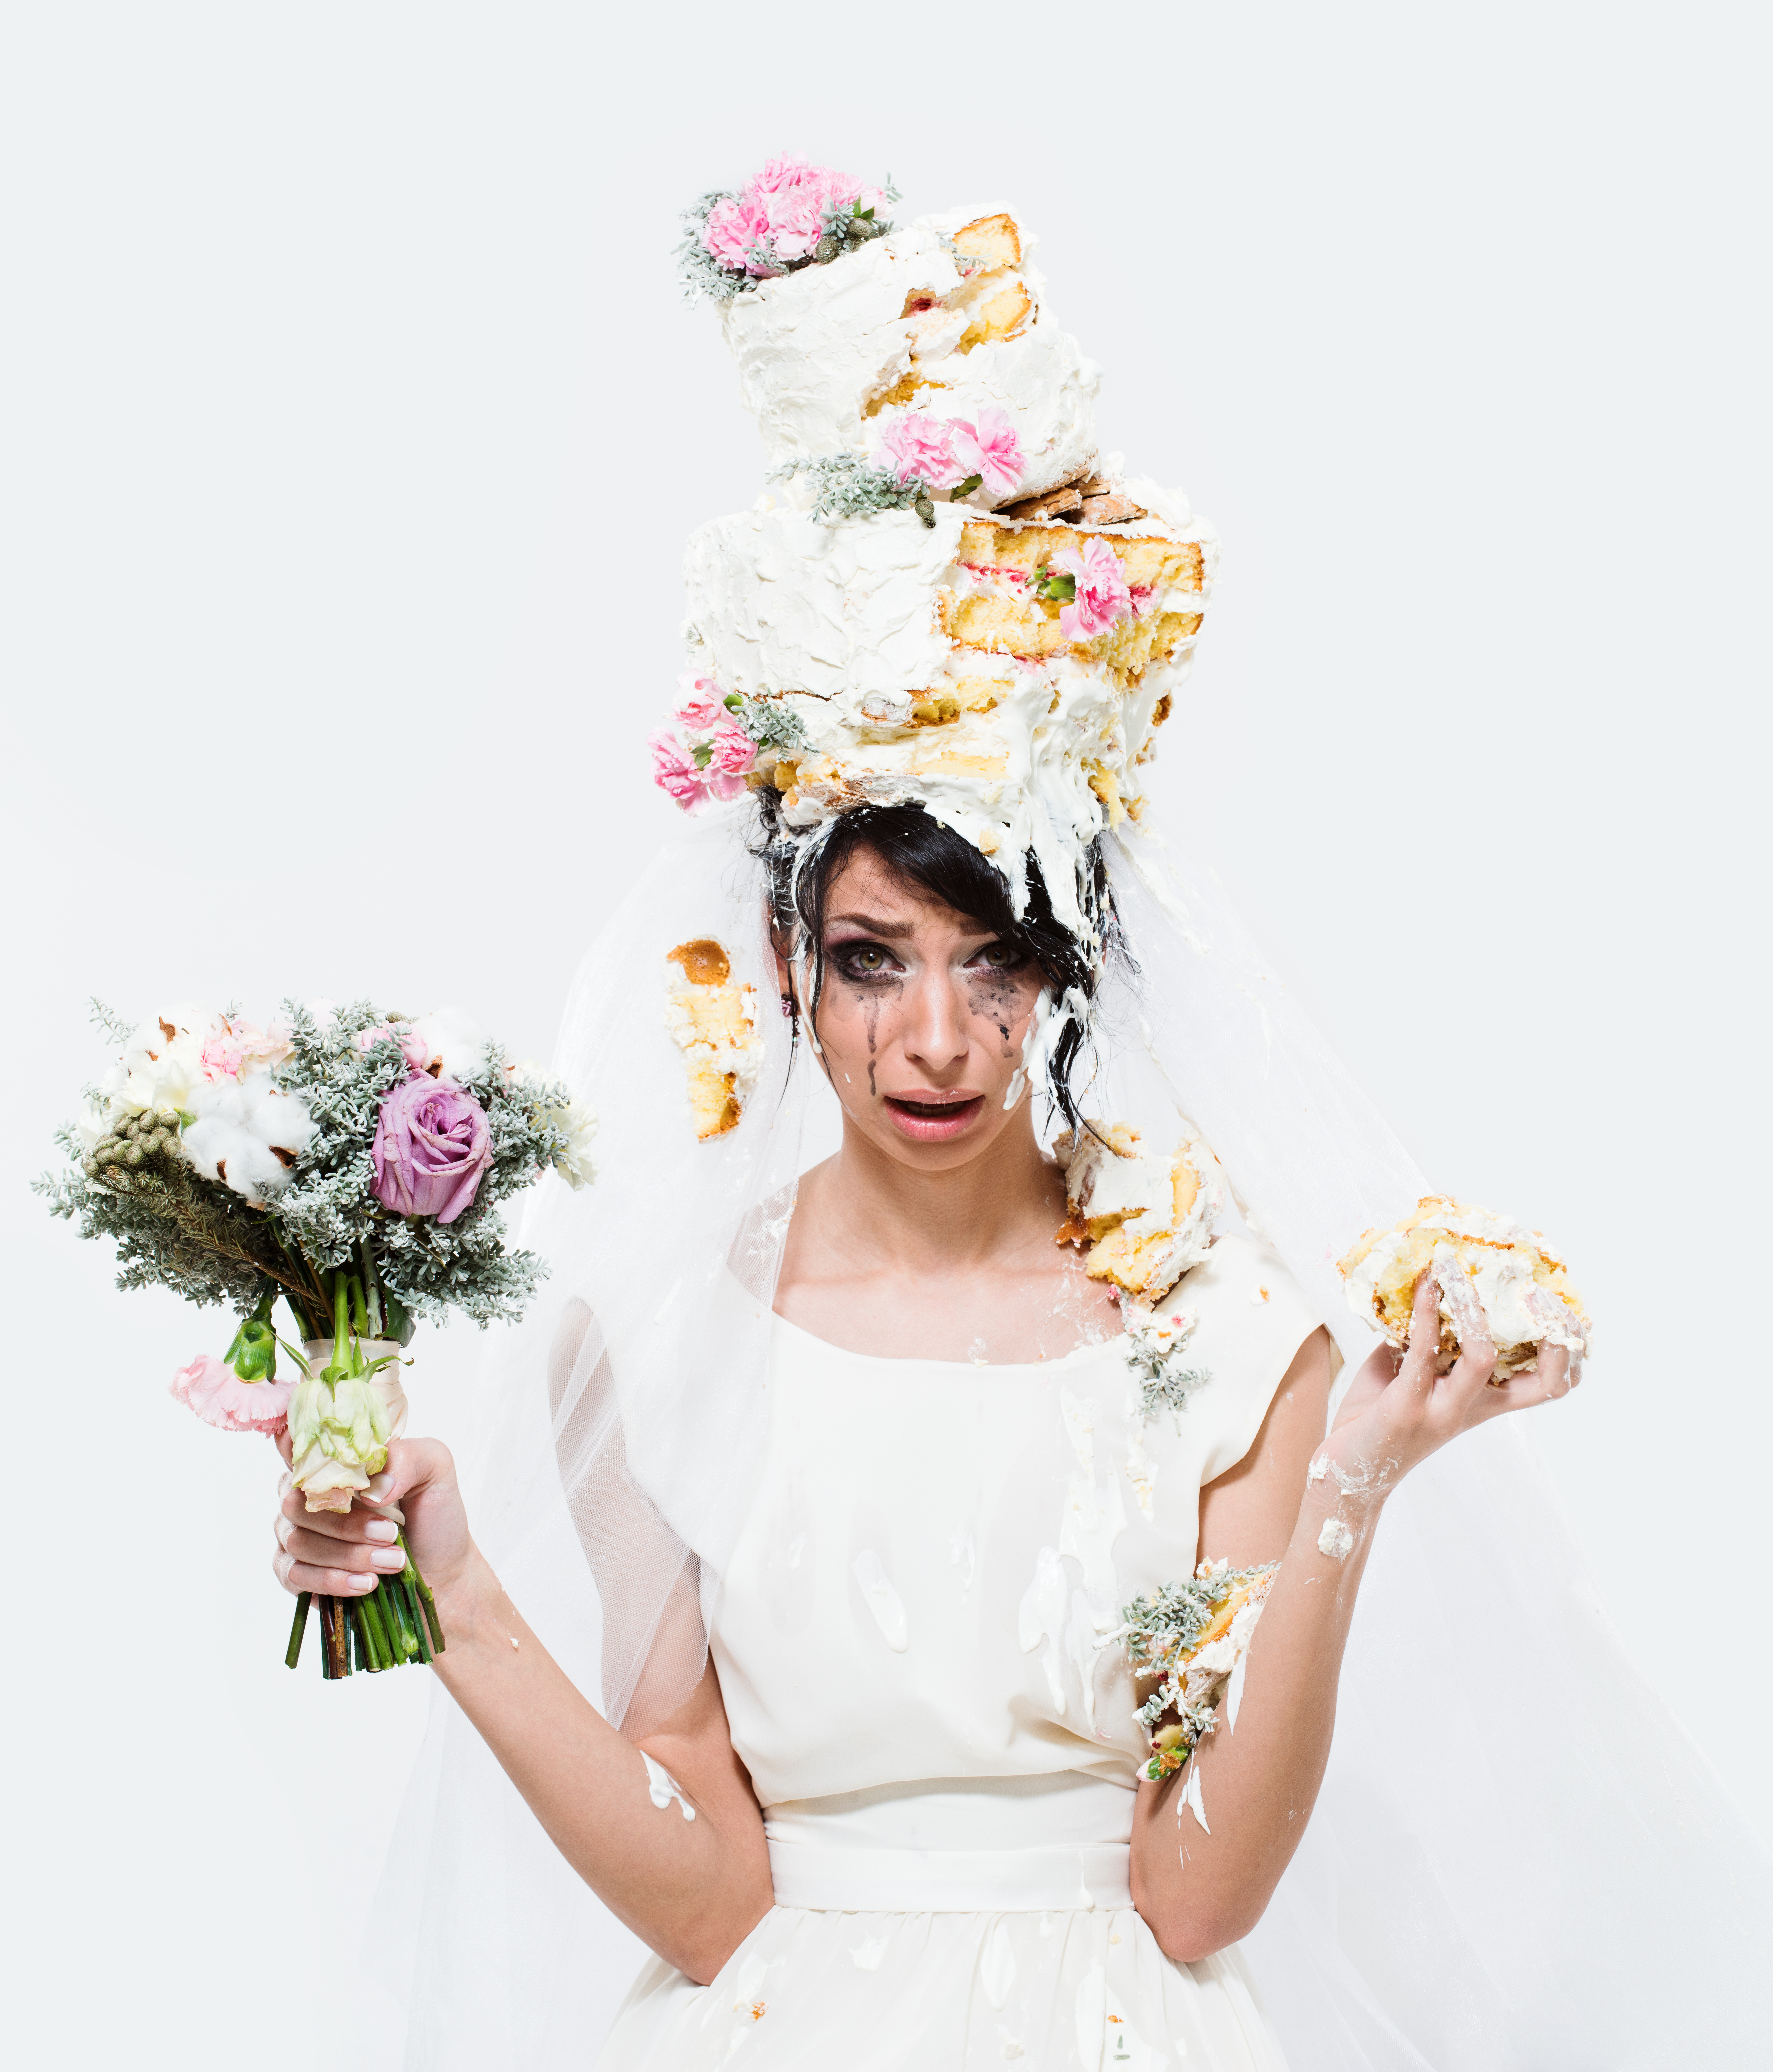 Crying bride with cake on head | Source: Shutterstock